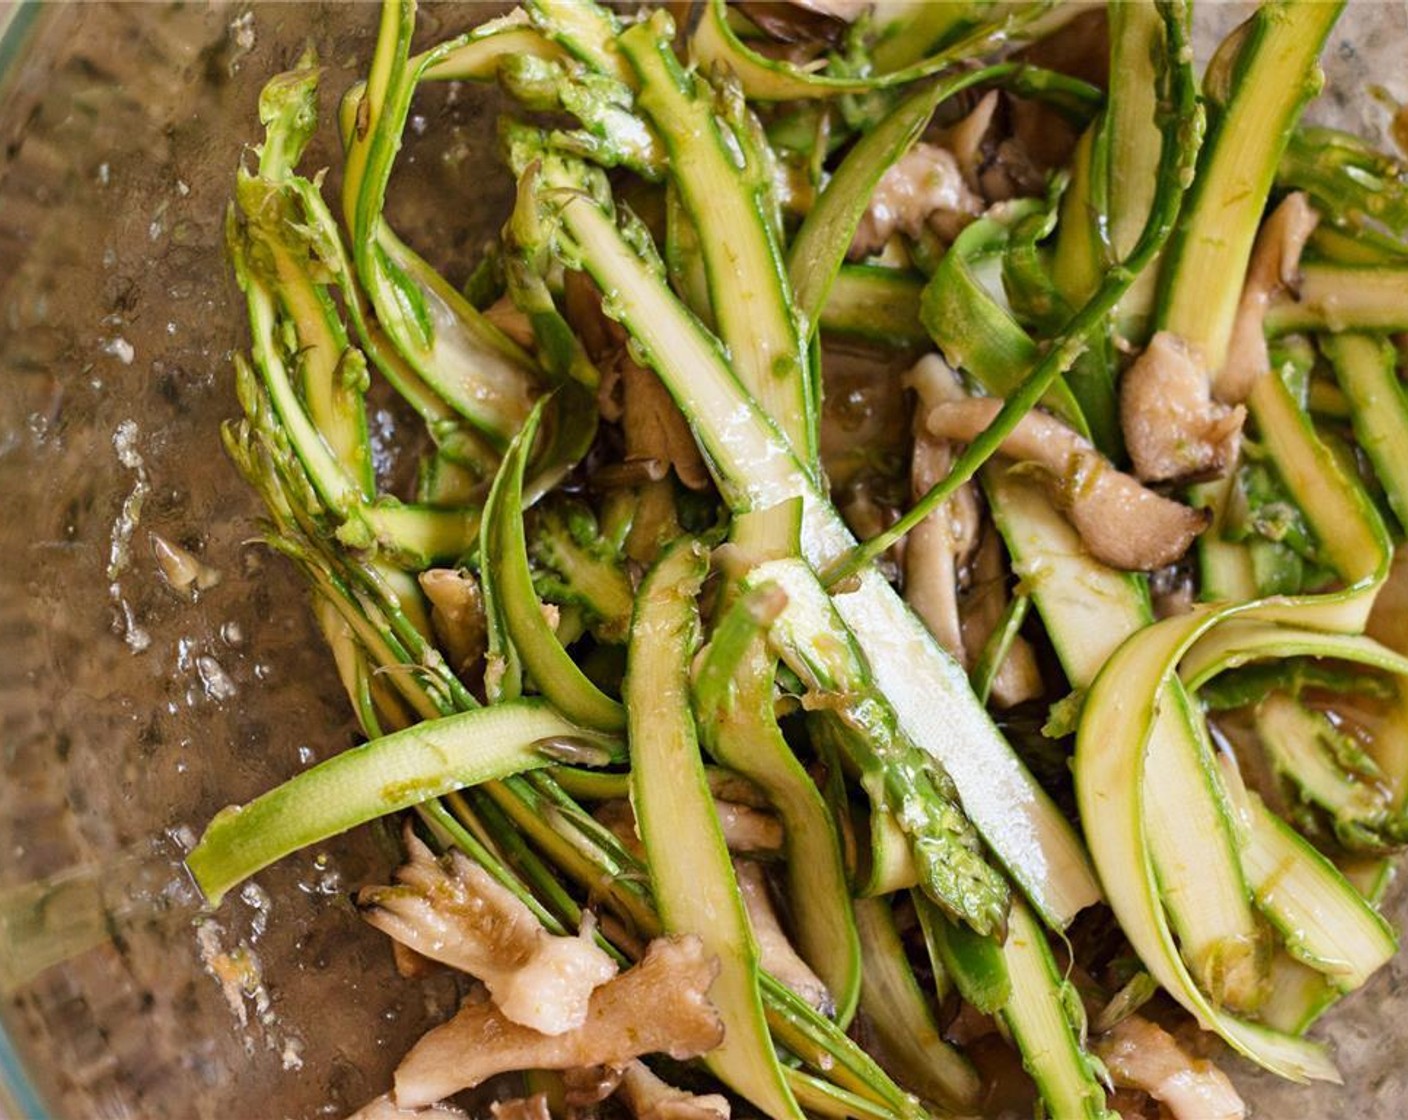 step 5 Add the asparagus to the mushrooms and vinaigrette. Toss to combine and allow to marinate while the noodles cook.